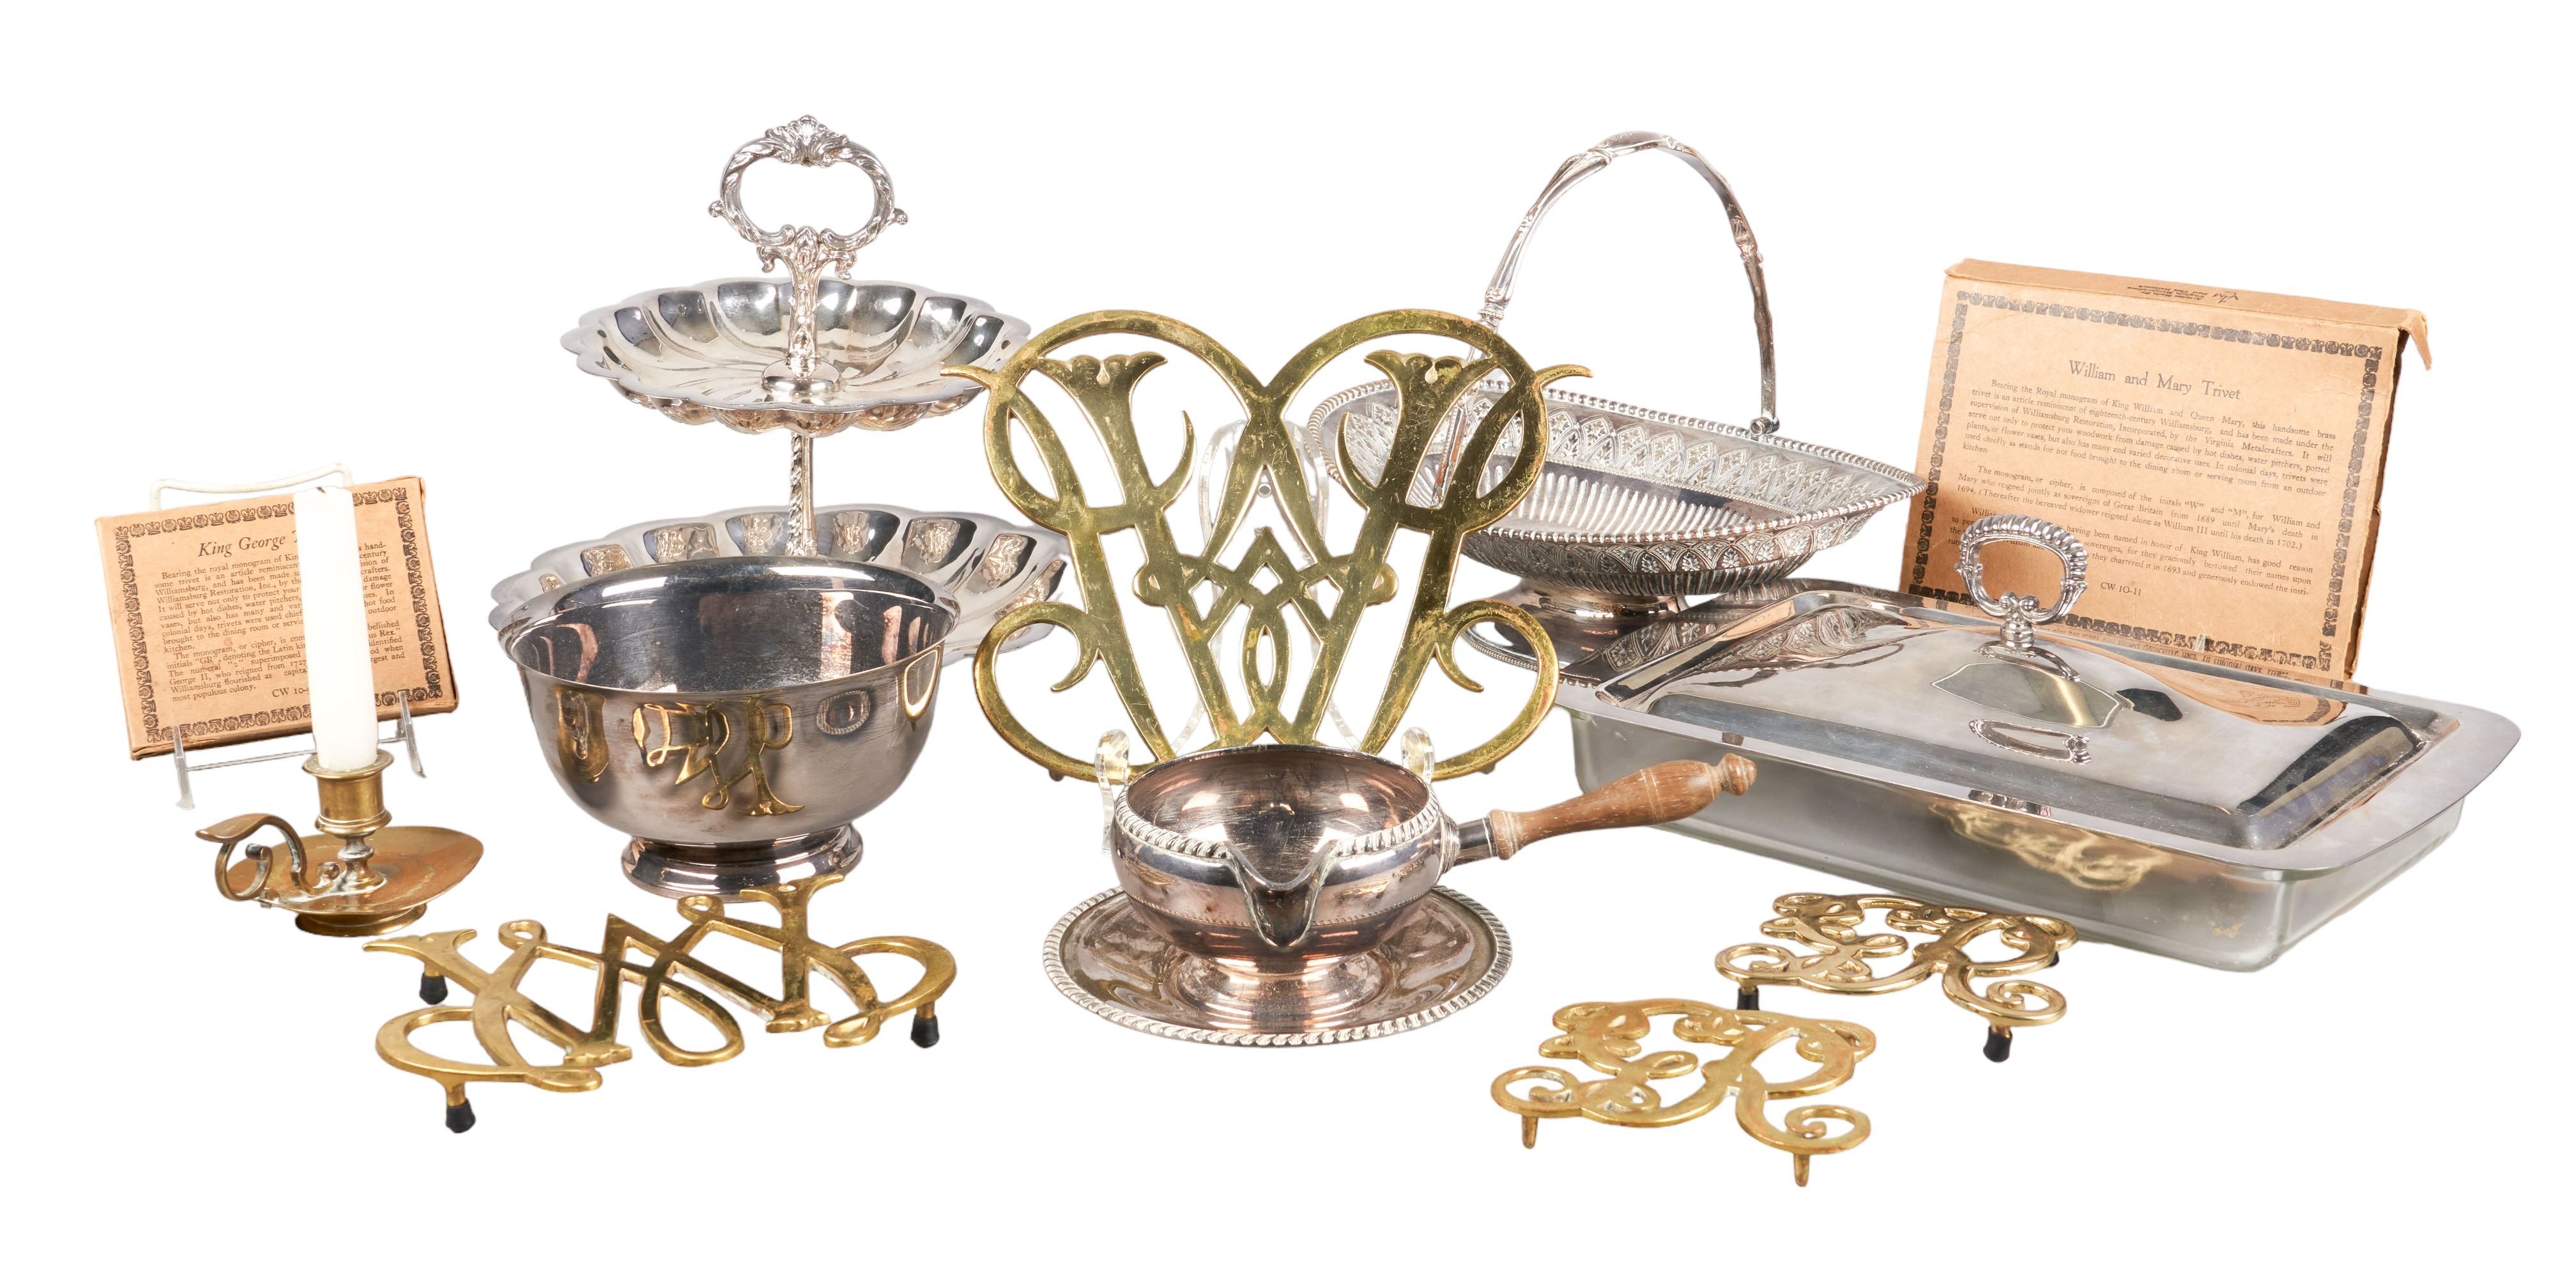 Lot of silver plate brass items  2e201d